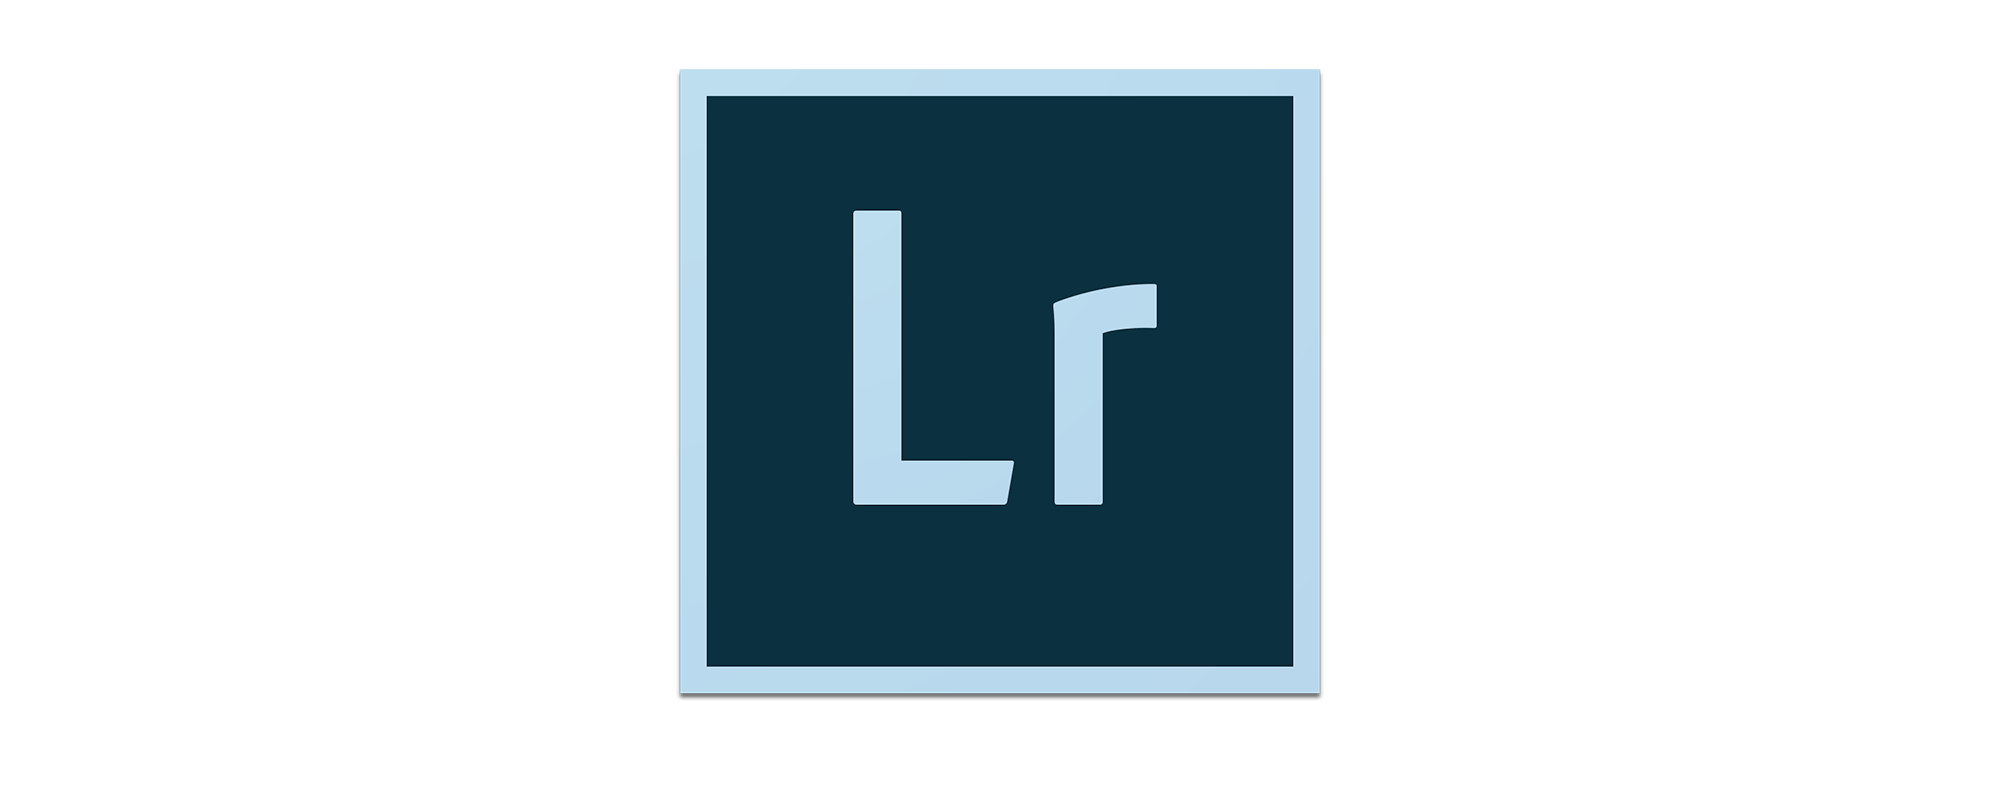 Lightroom Icon by tomkierz 